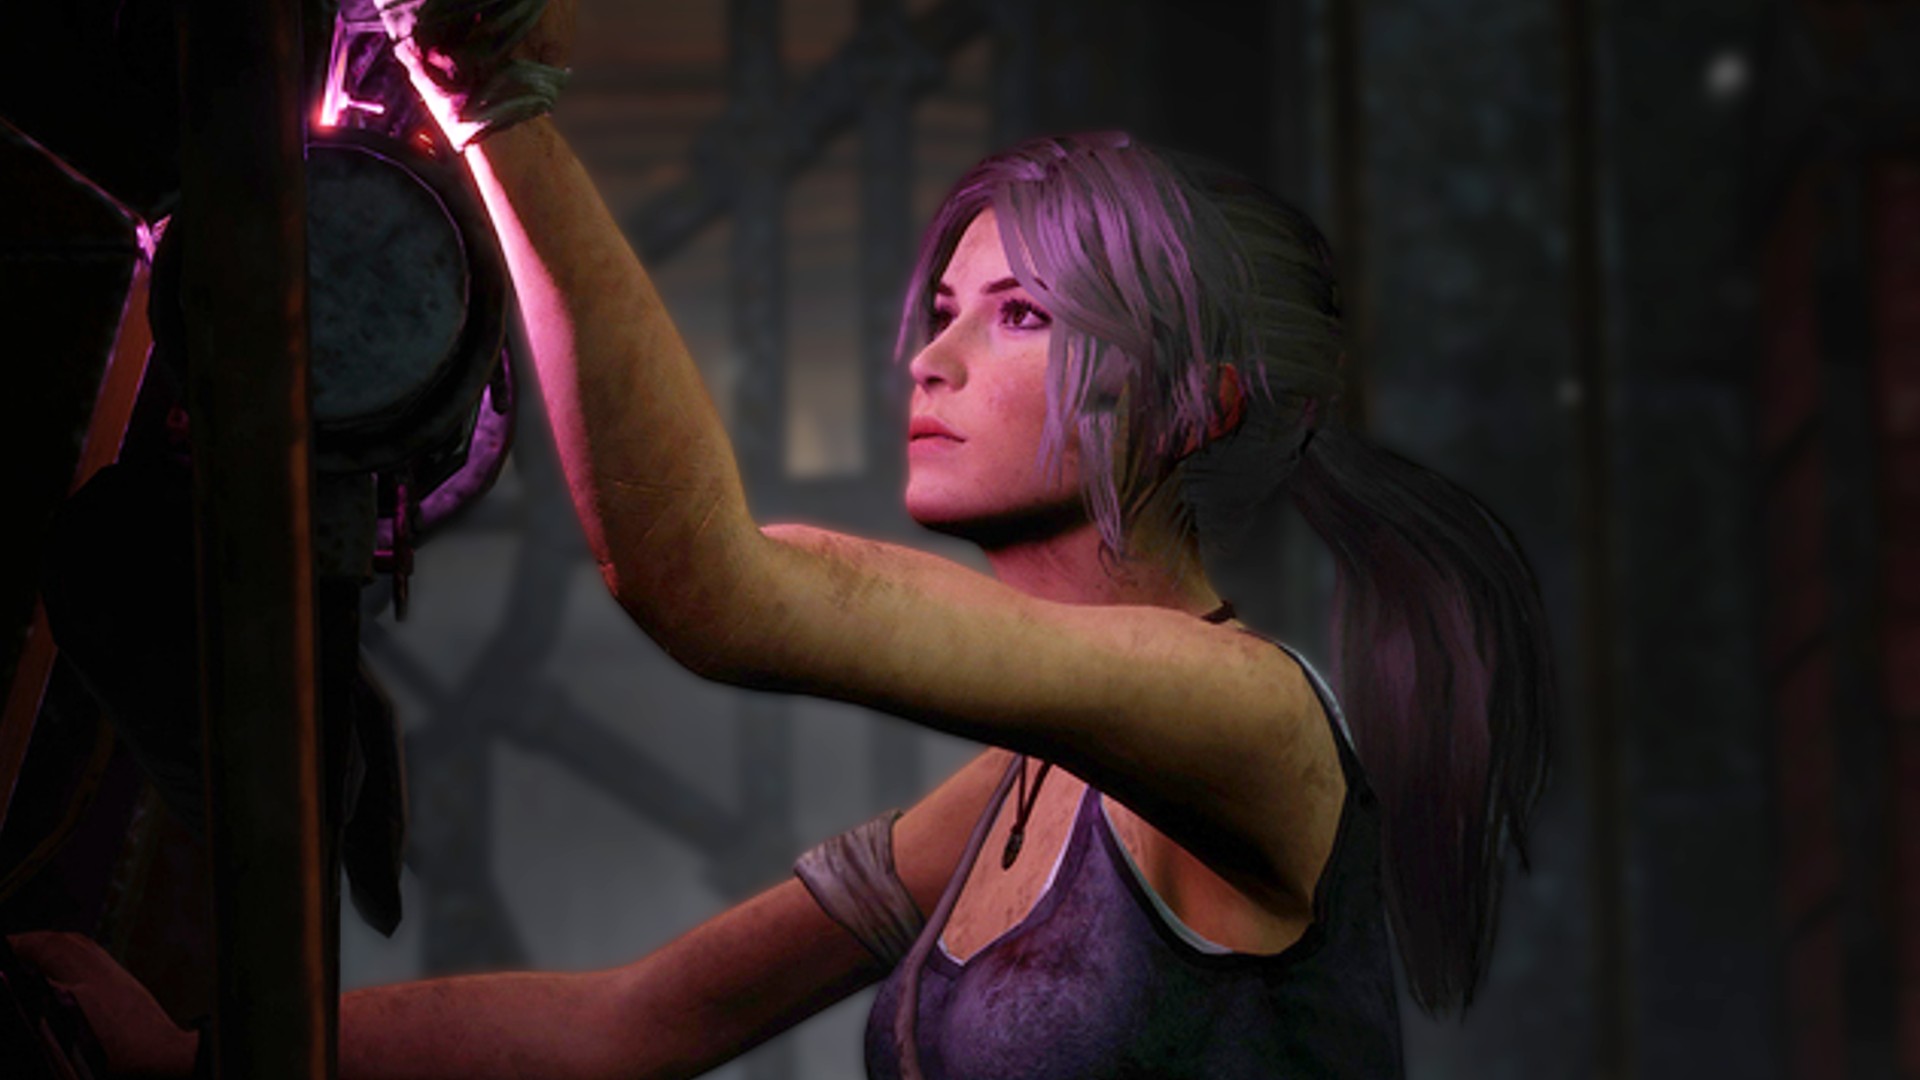 Lara Croft DBD chapter release date, time, and details